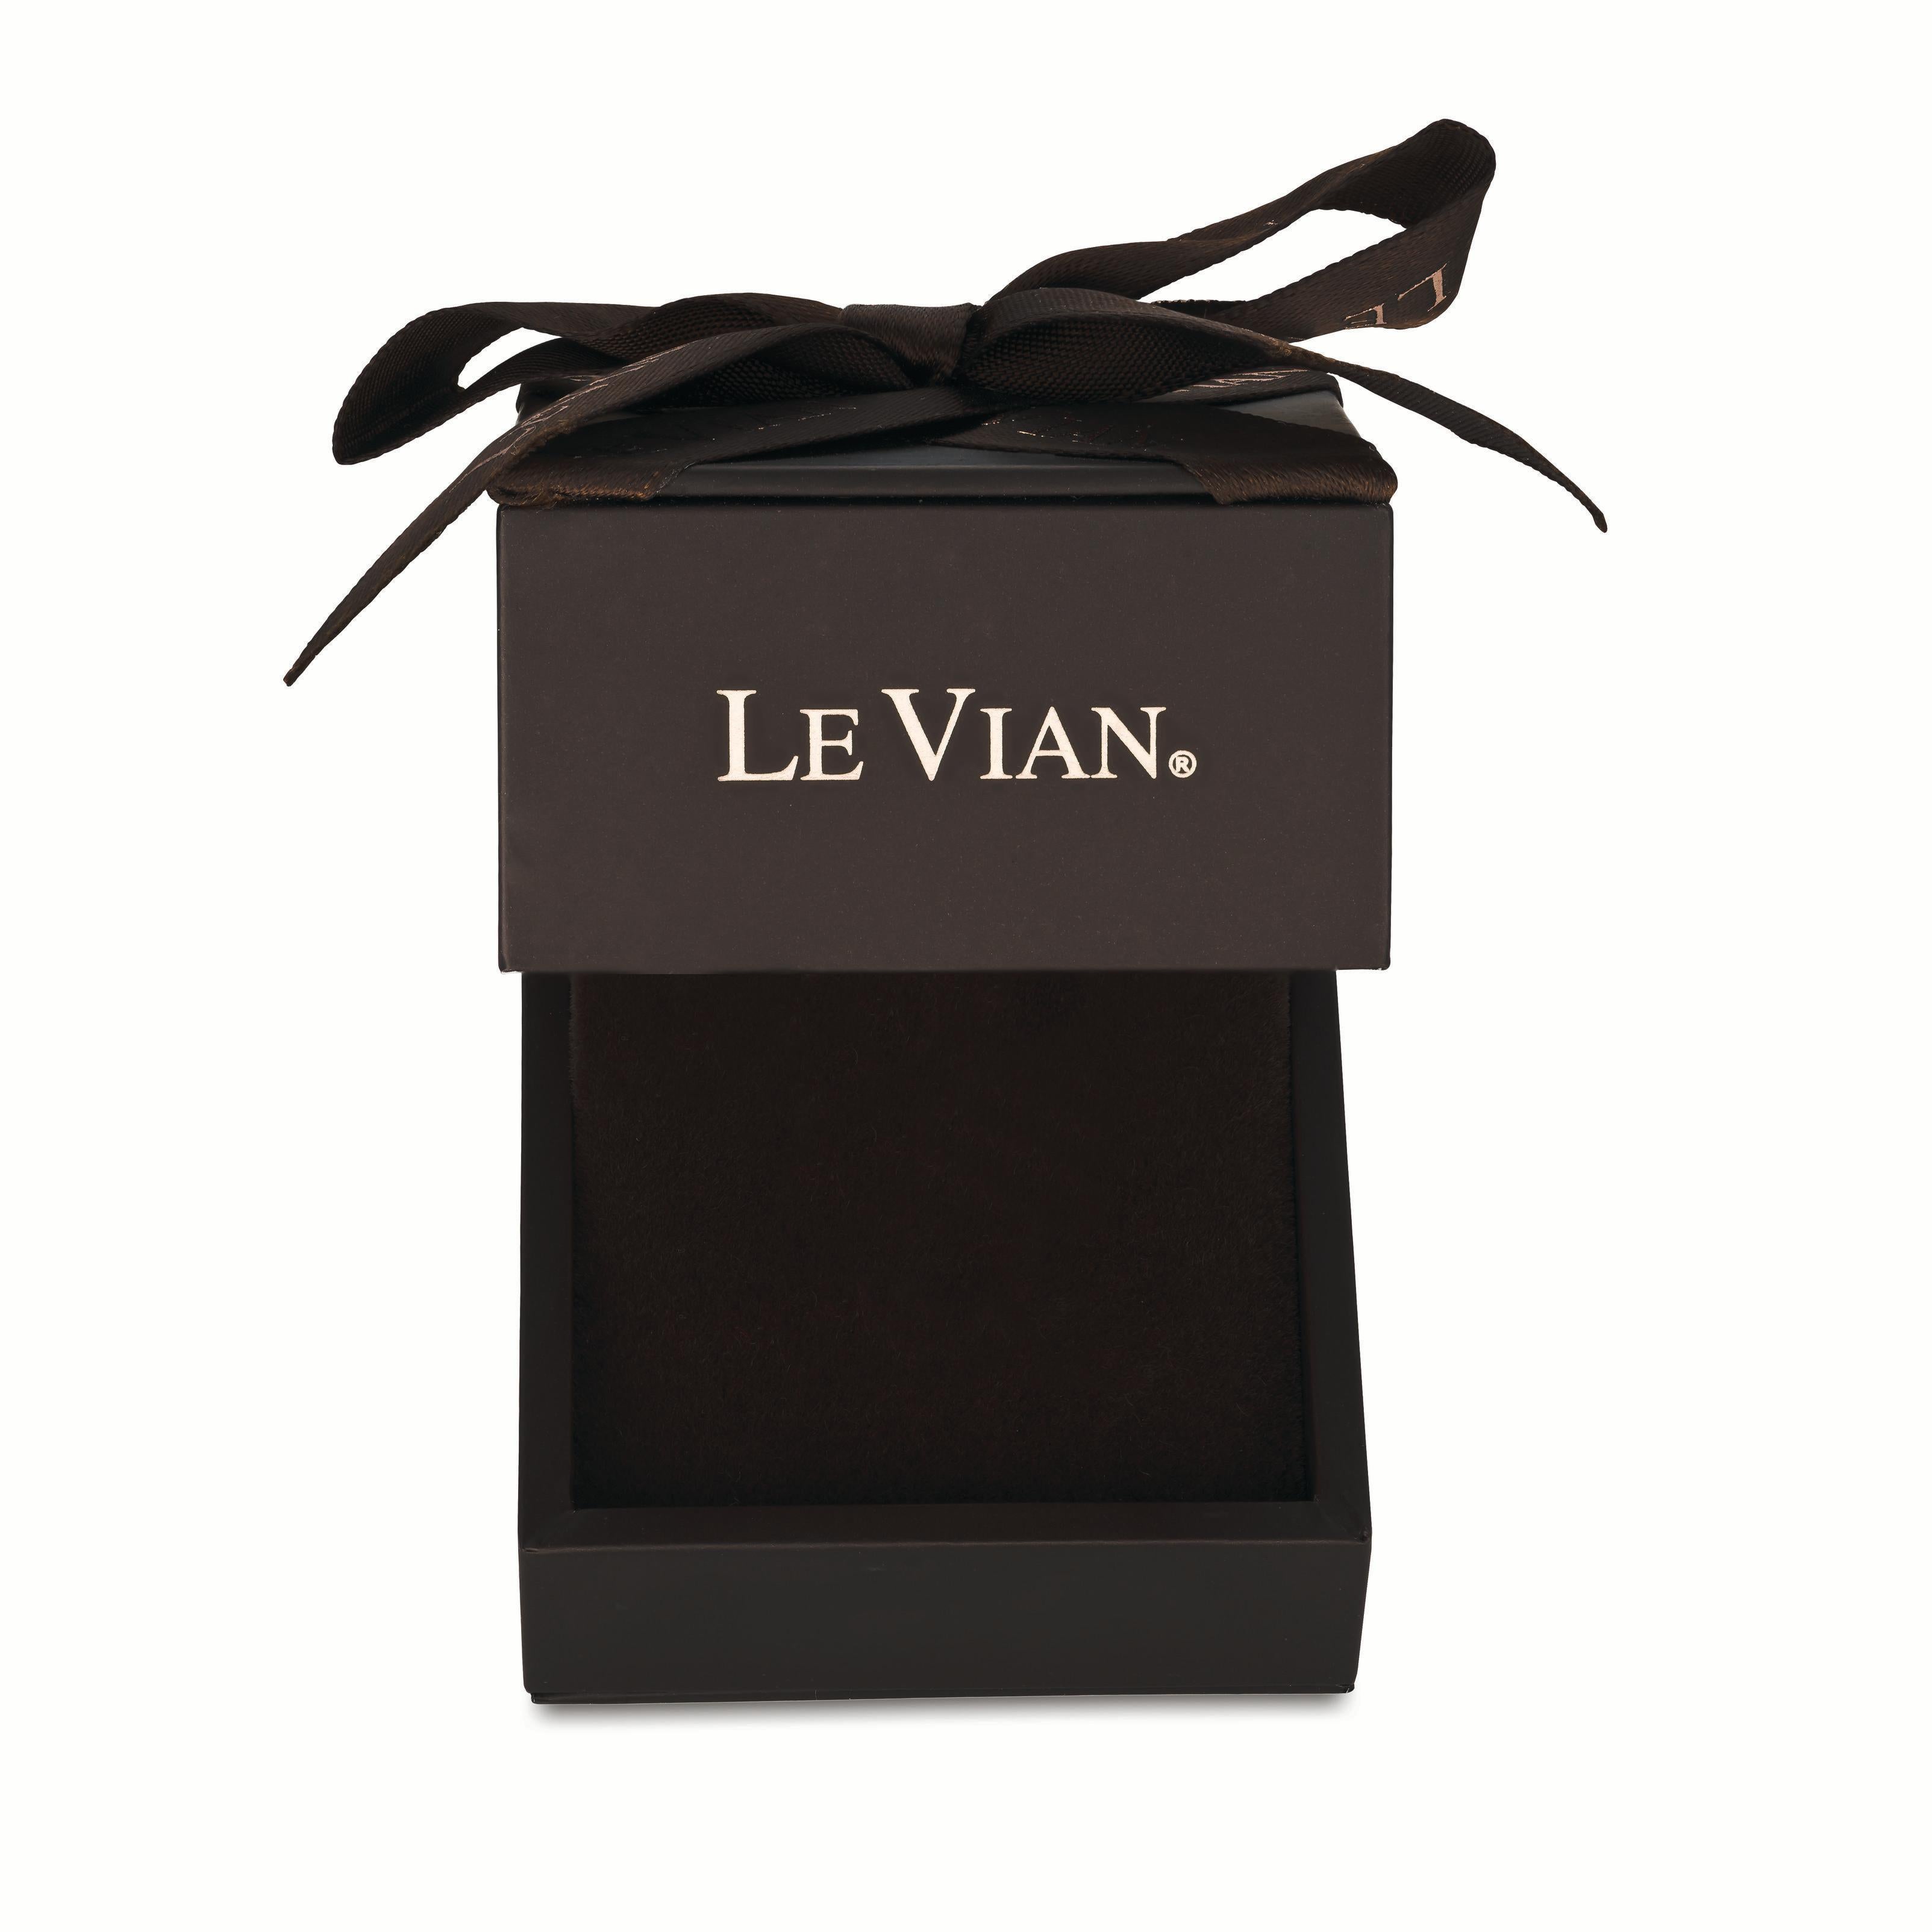 Le Vian 5.875 Carat Chocolate and White Diamond White Gold Earrings For Sale 1